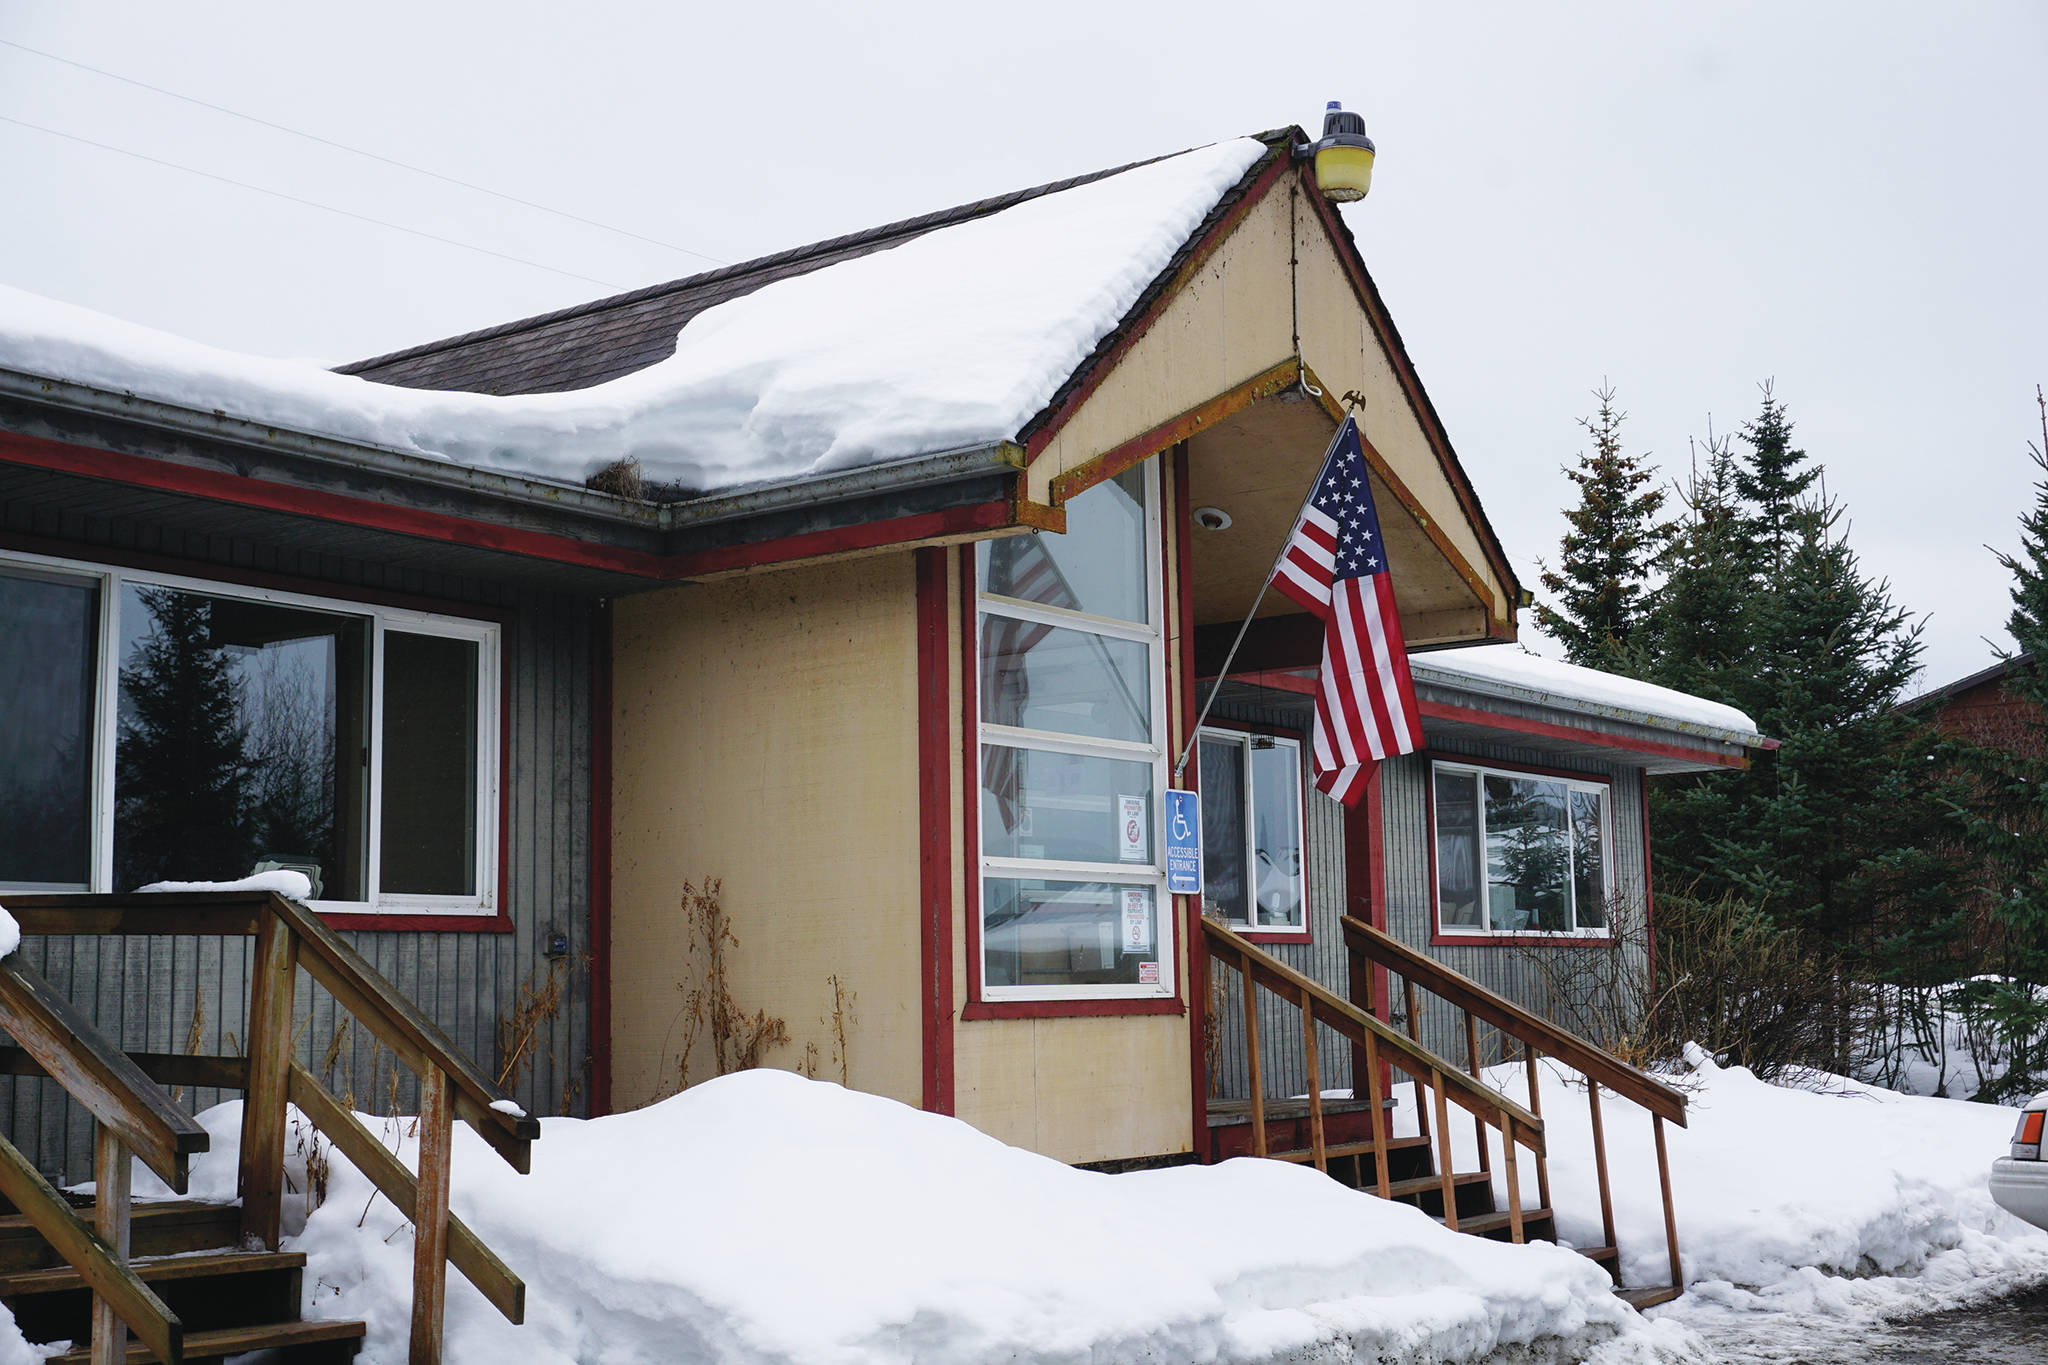 The Homer News offices at 3482 Landings Street, as seen on March 17, 2020, in Homer, Alaska. (Photo by Michael Armstrong/Homer News)